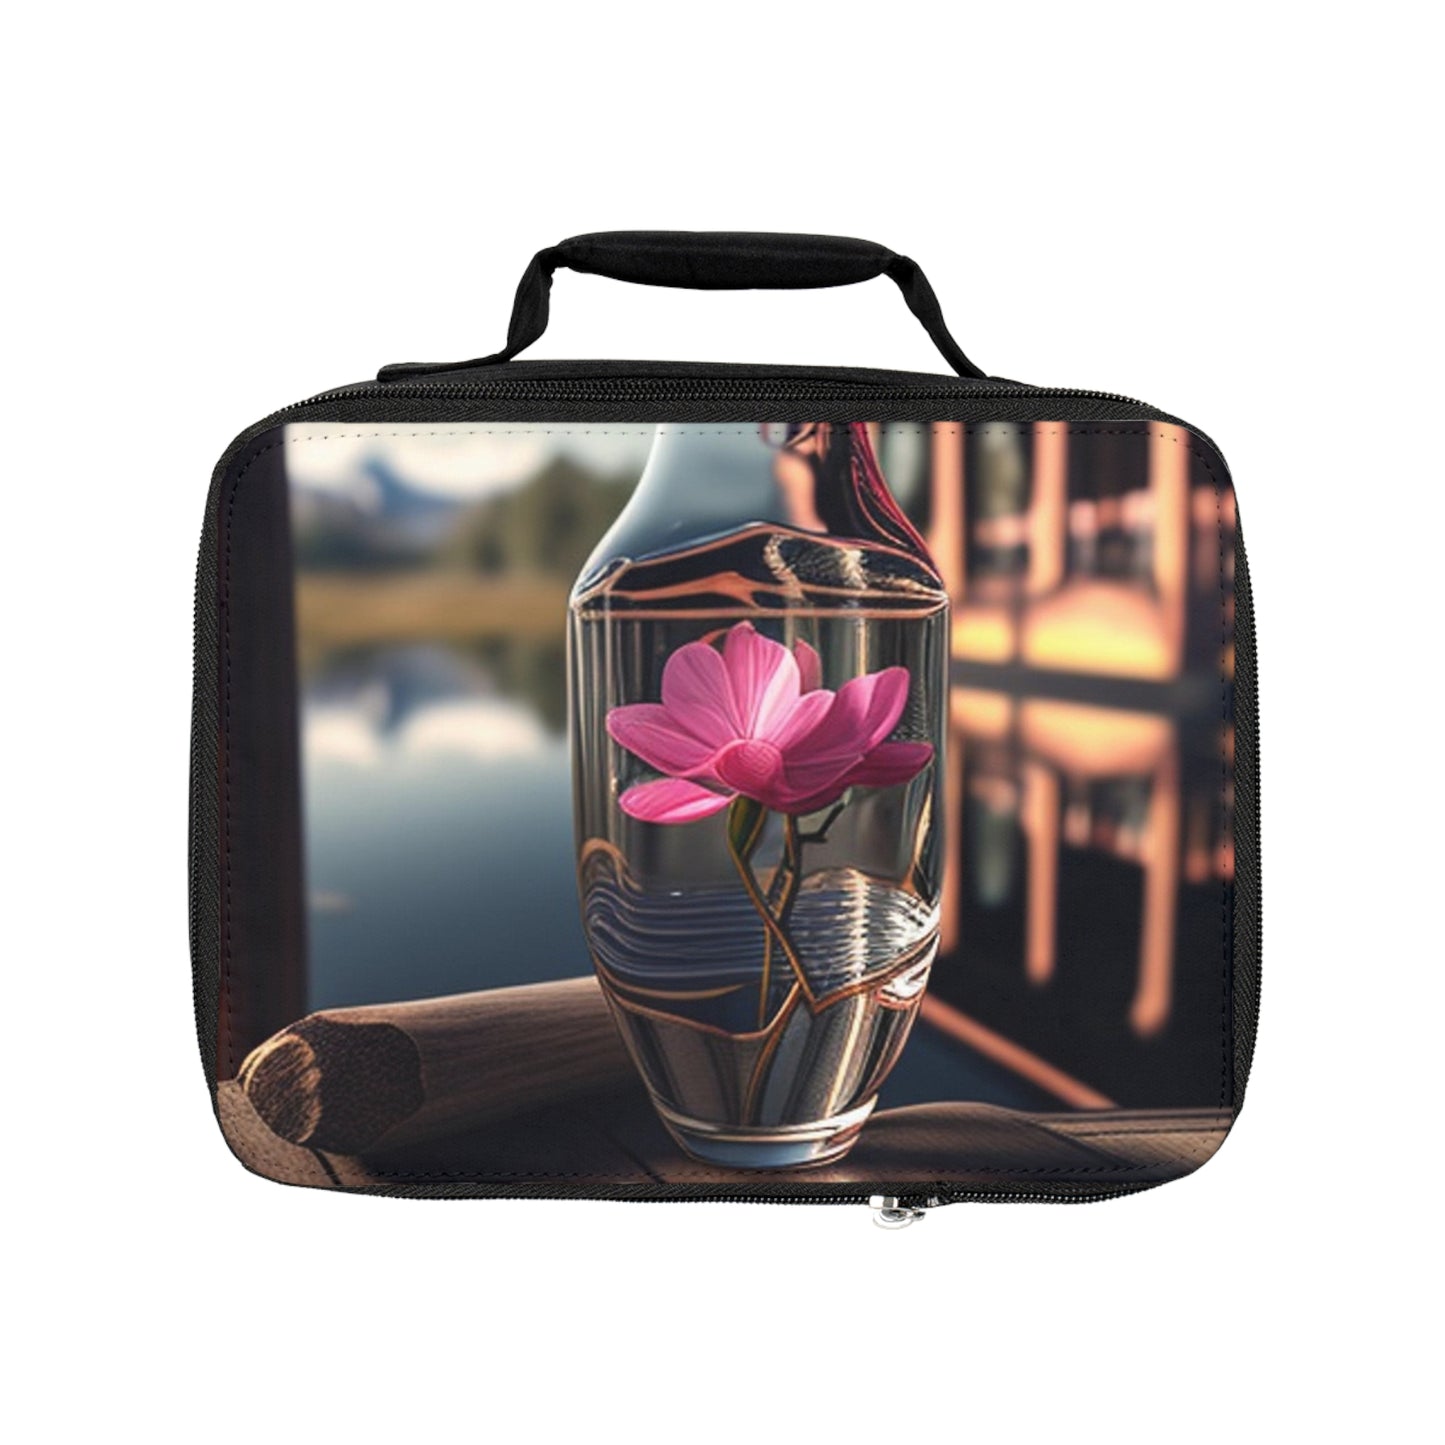 Lunch Bag Magnolia in a Glass vase 3